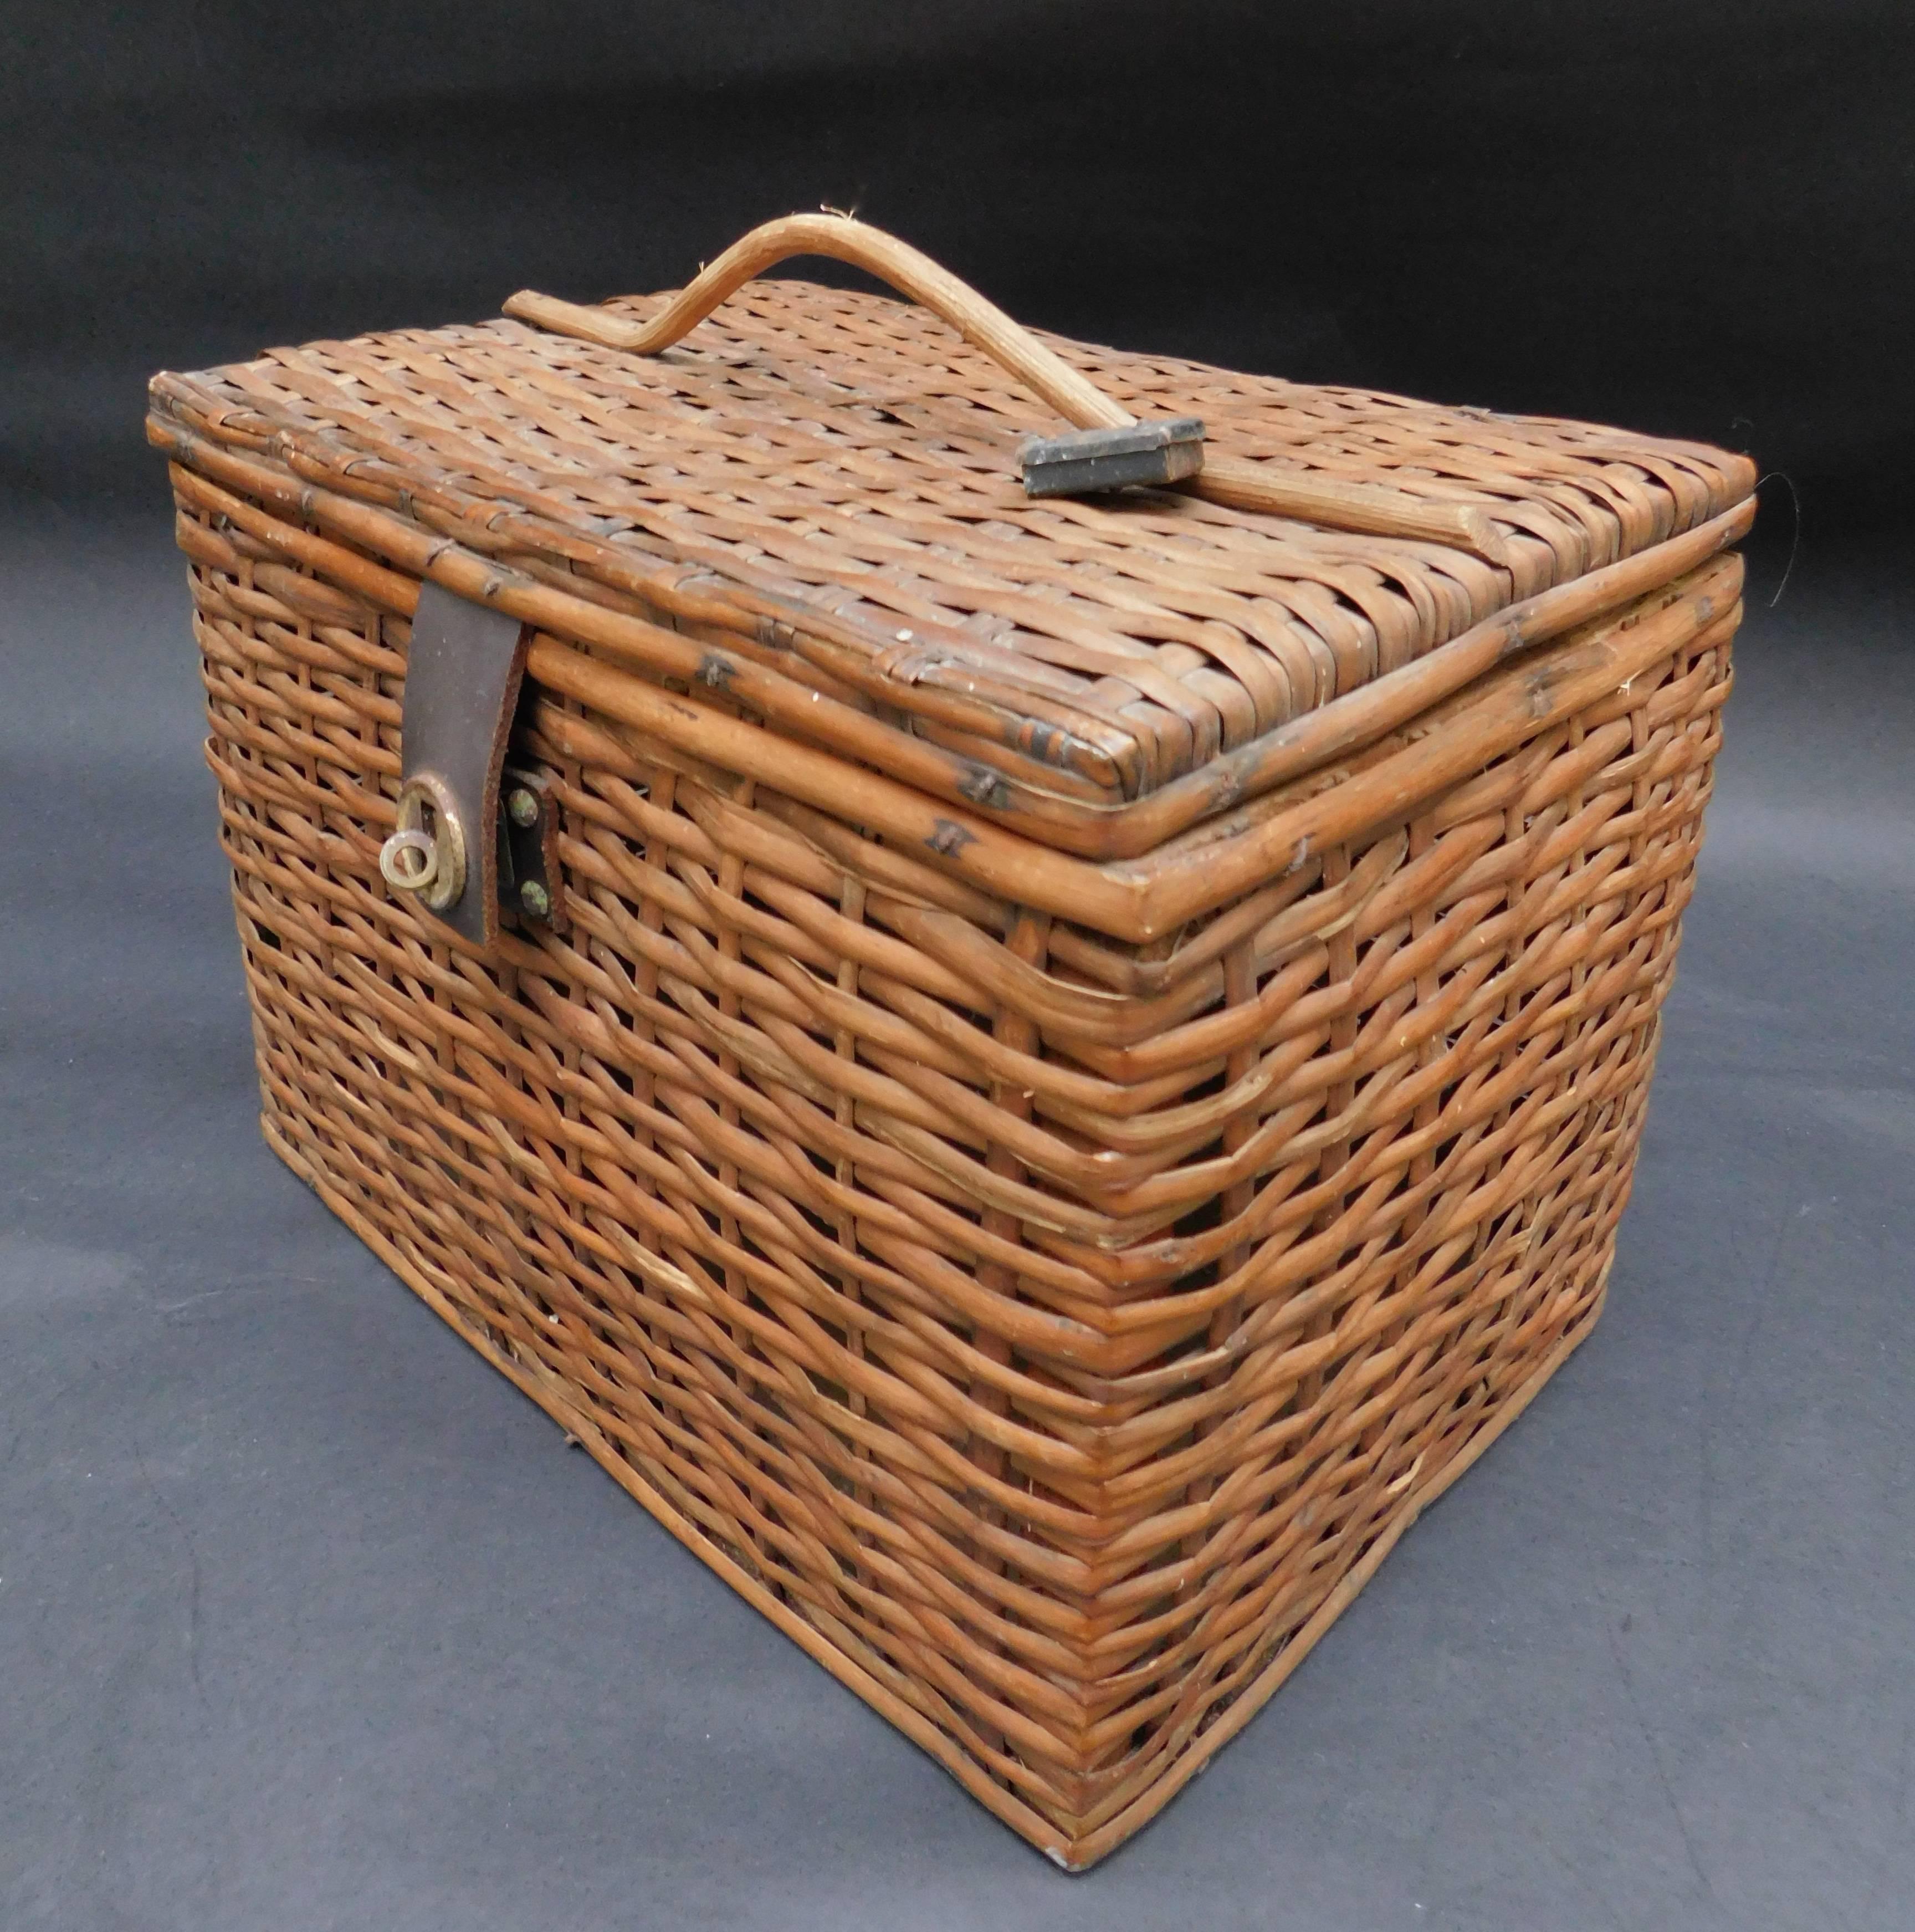 Unusual French market basket with a handle and lock (no key)  Circa 1950.